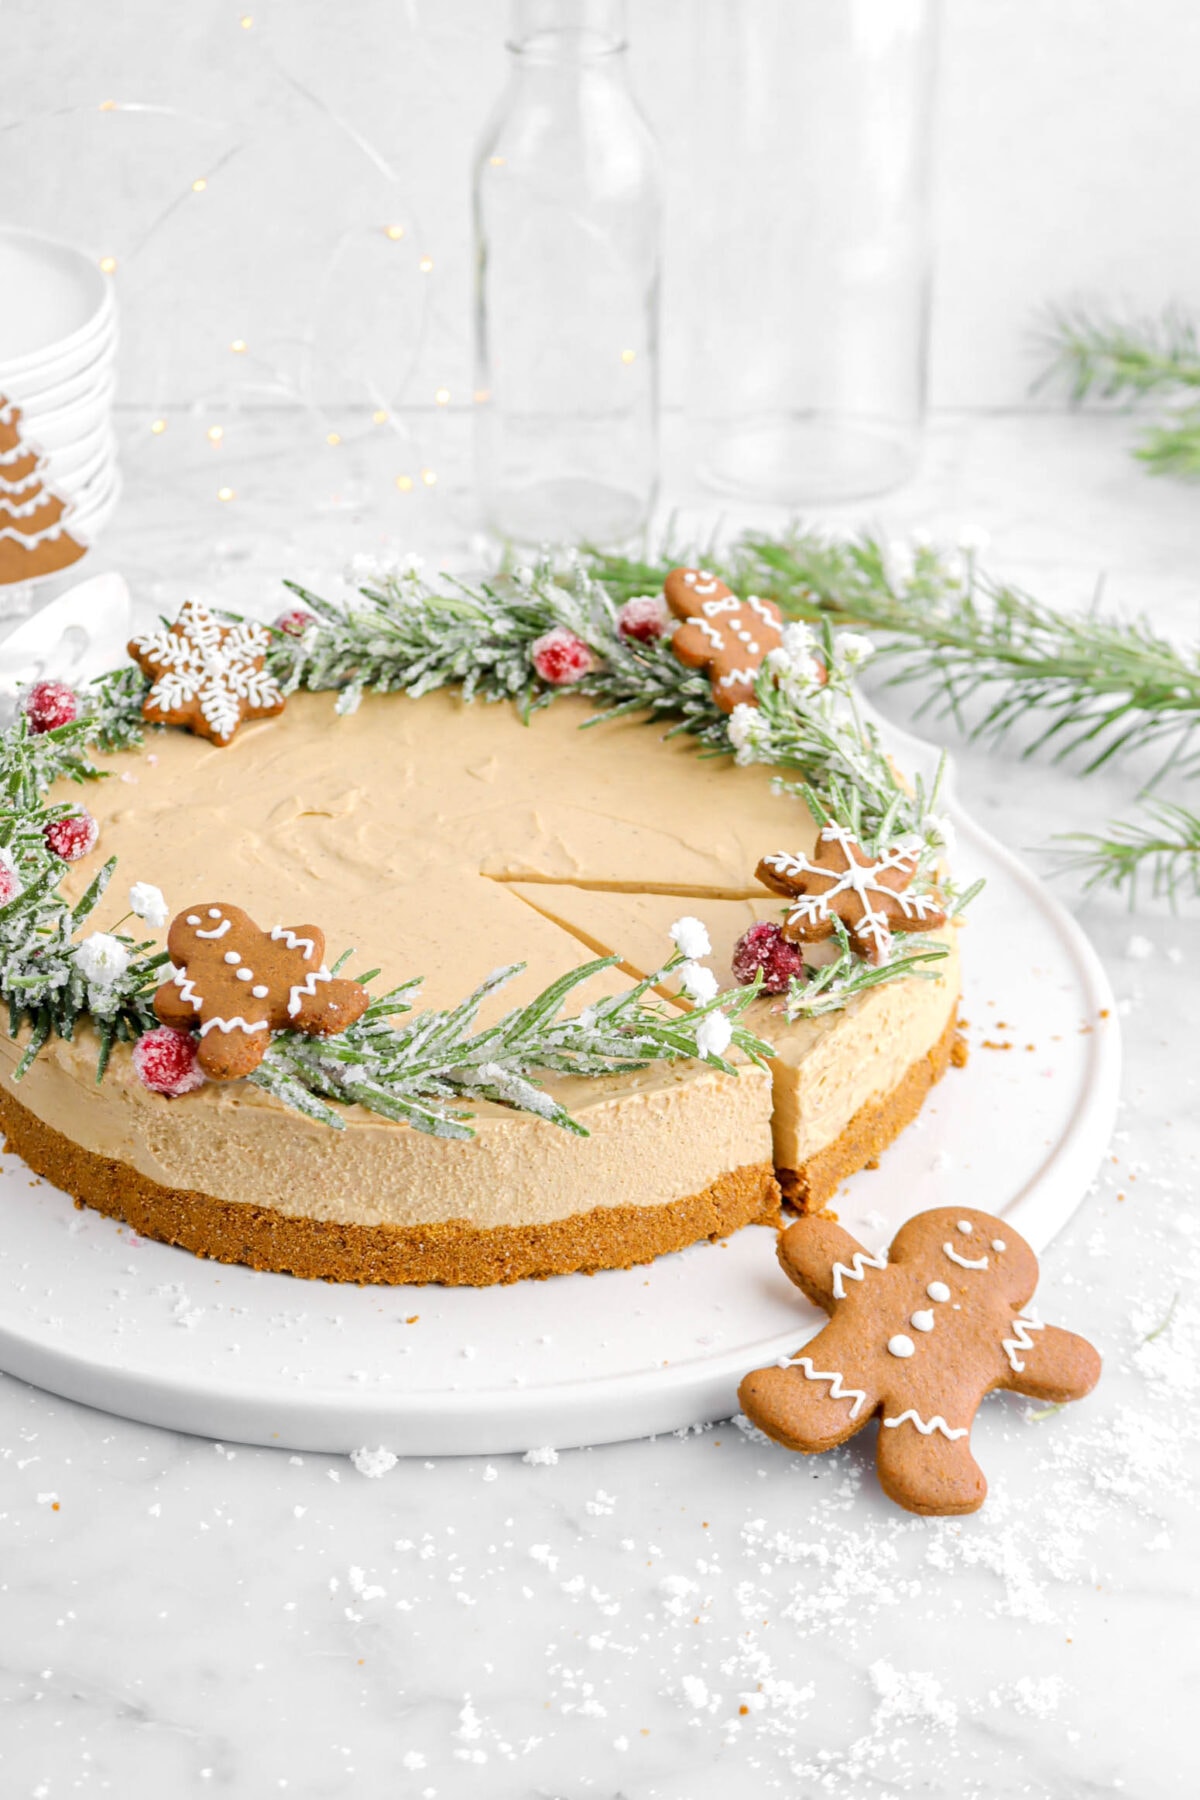 slice cut into cheesecake on white tray with gingerbread cookies on top, sugared rosemary, and sugared cranberries.